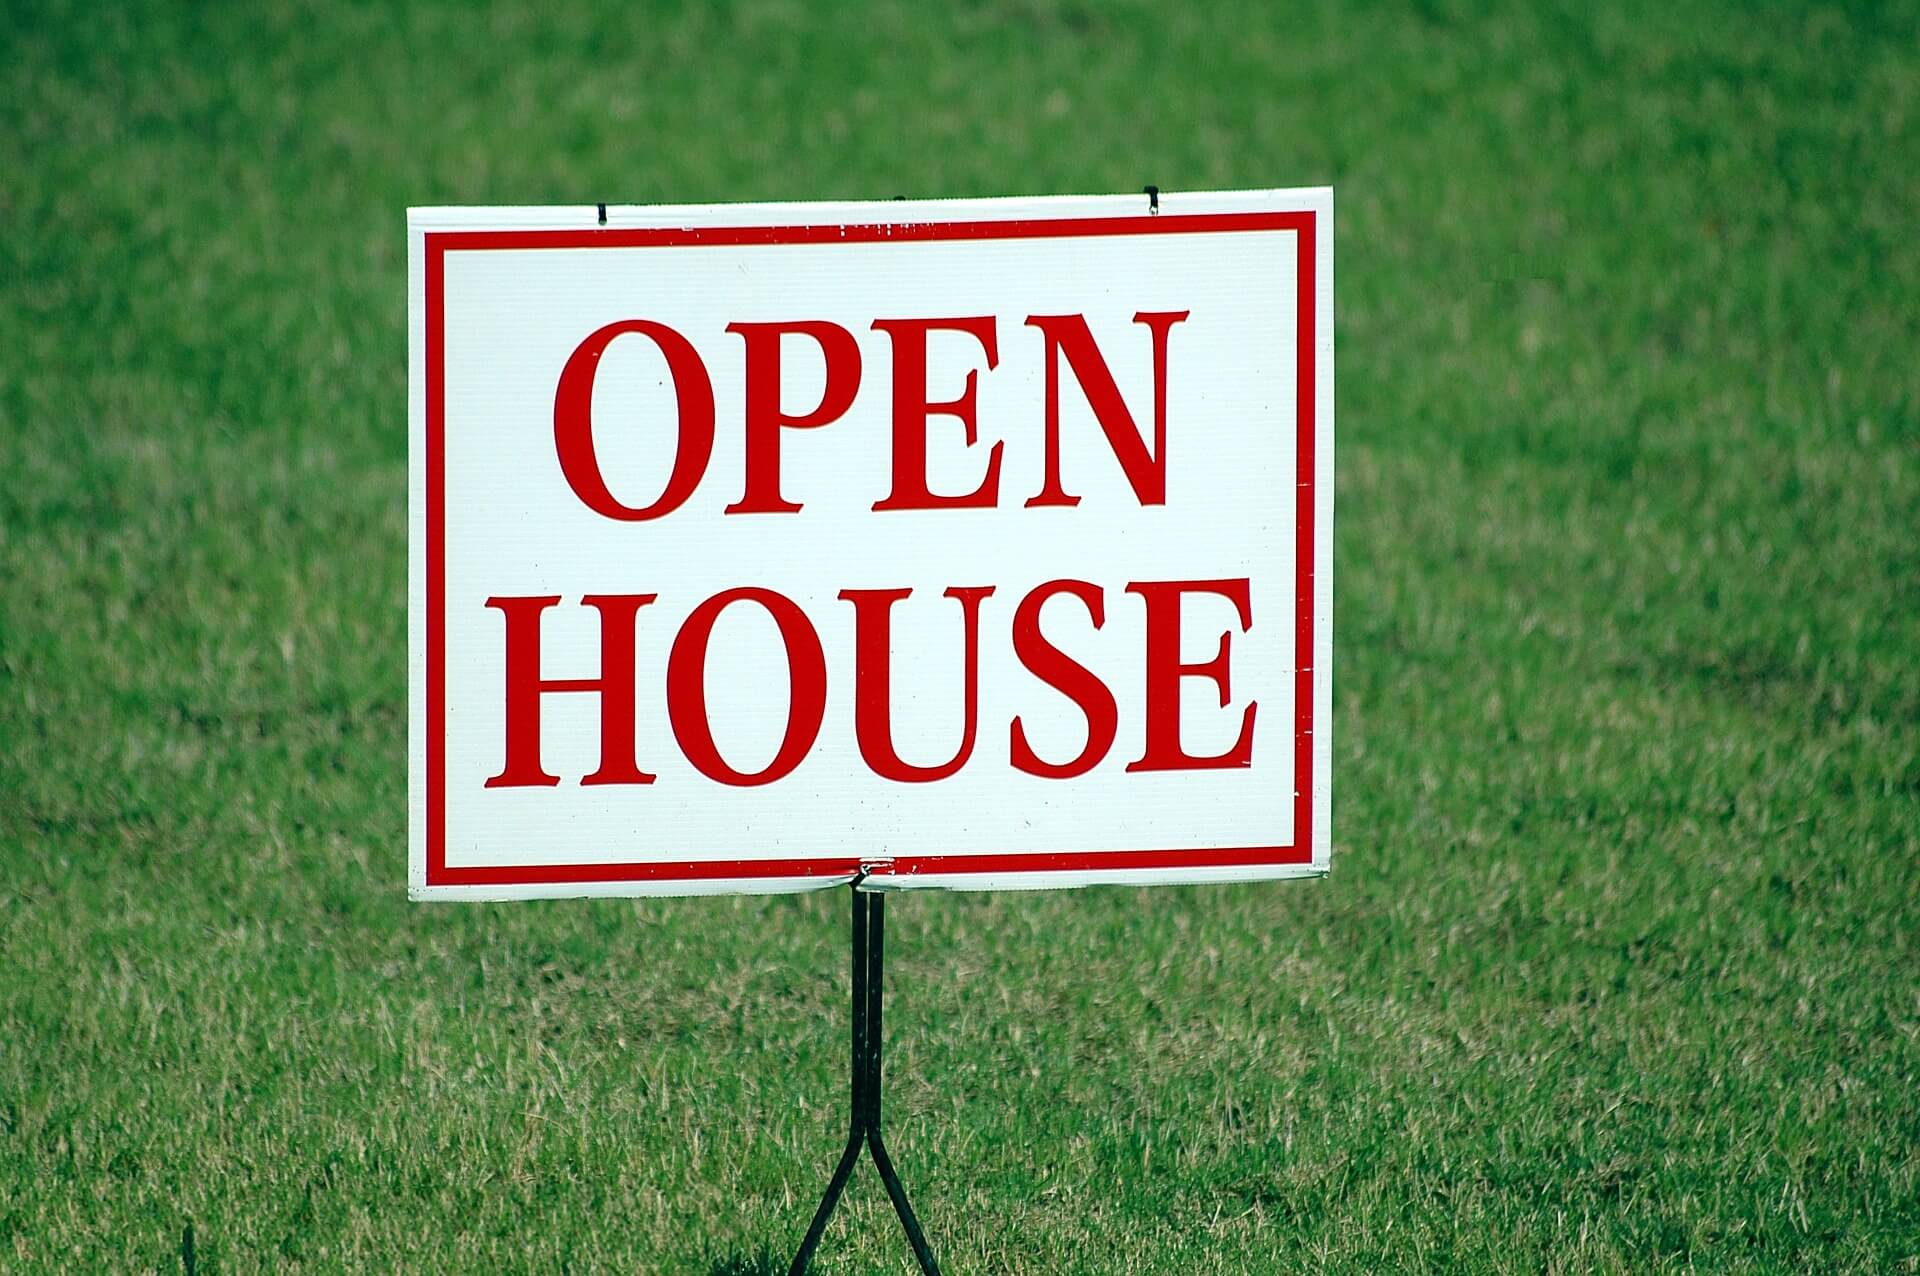 Security Specialists Top Ten Tips To Protect Your Home During an Open House